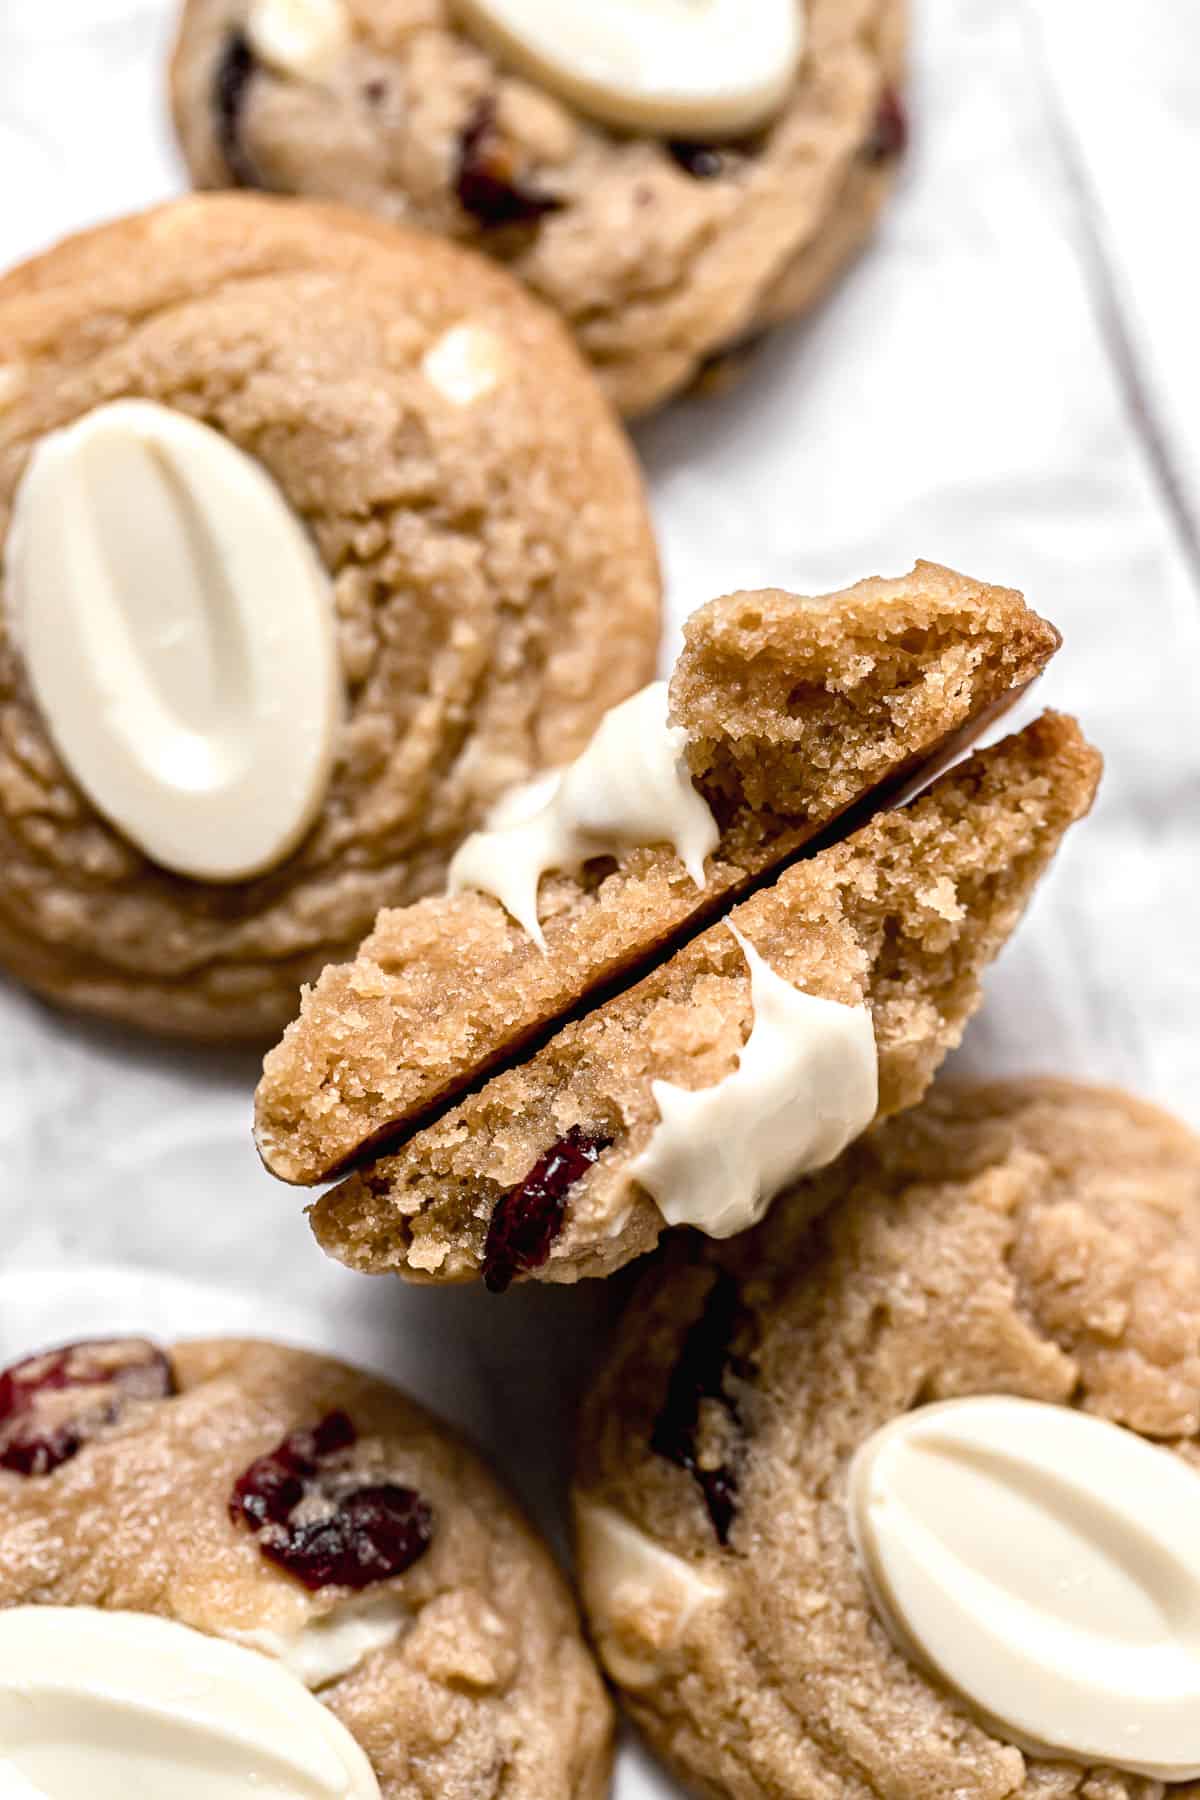 white chocolate cranberry cookie broken in half to reveal inside texture